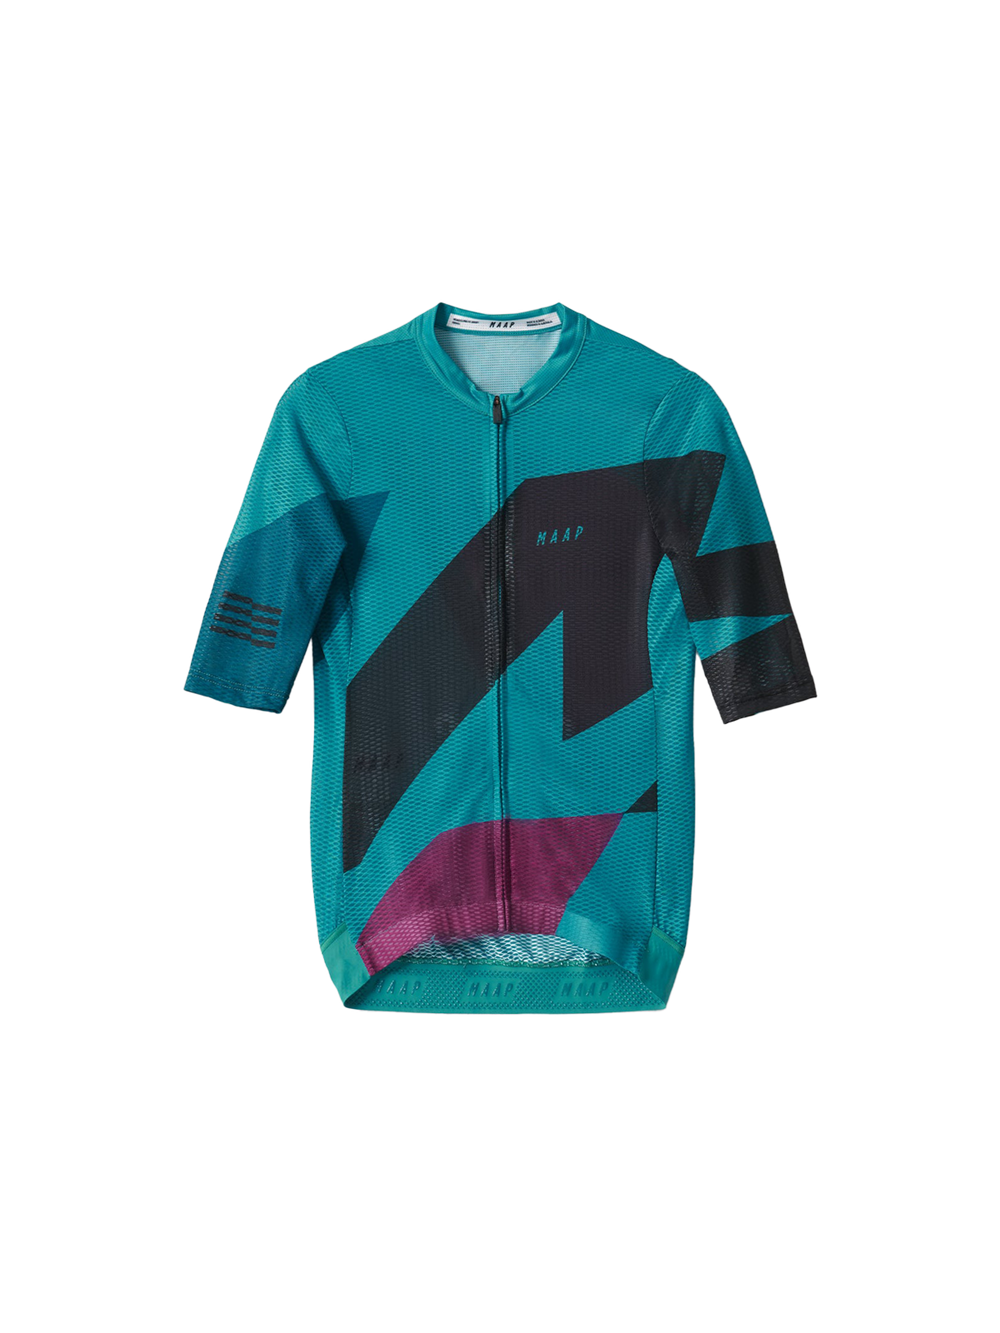 Product Image for Women's Emerge Ultralight Pro Jersey